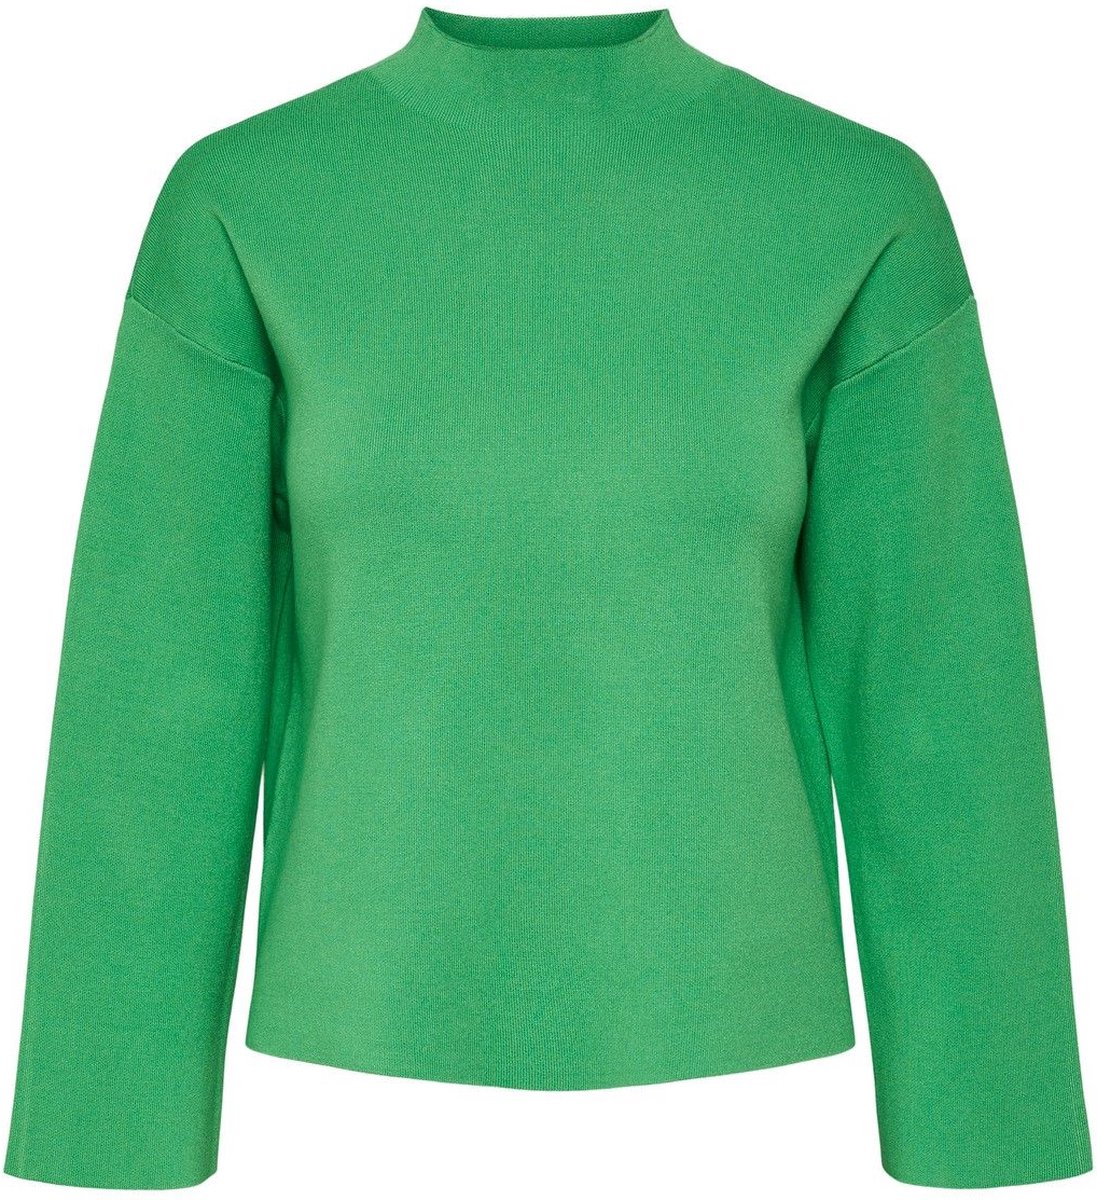 Y.A.S Verde 7/8 Knit Pullover Classic Green